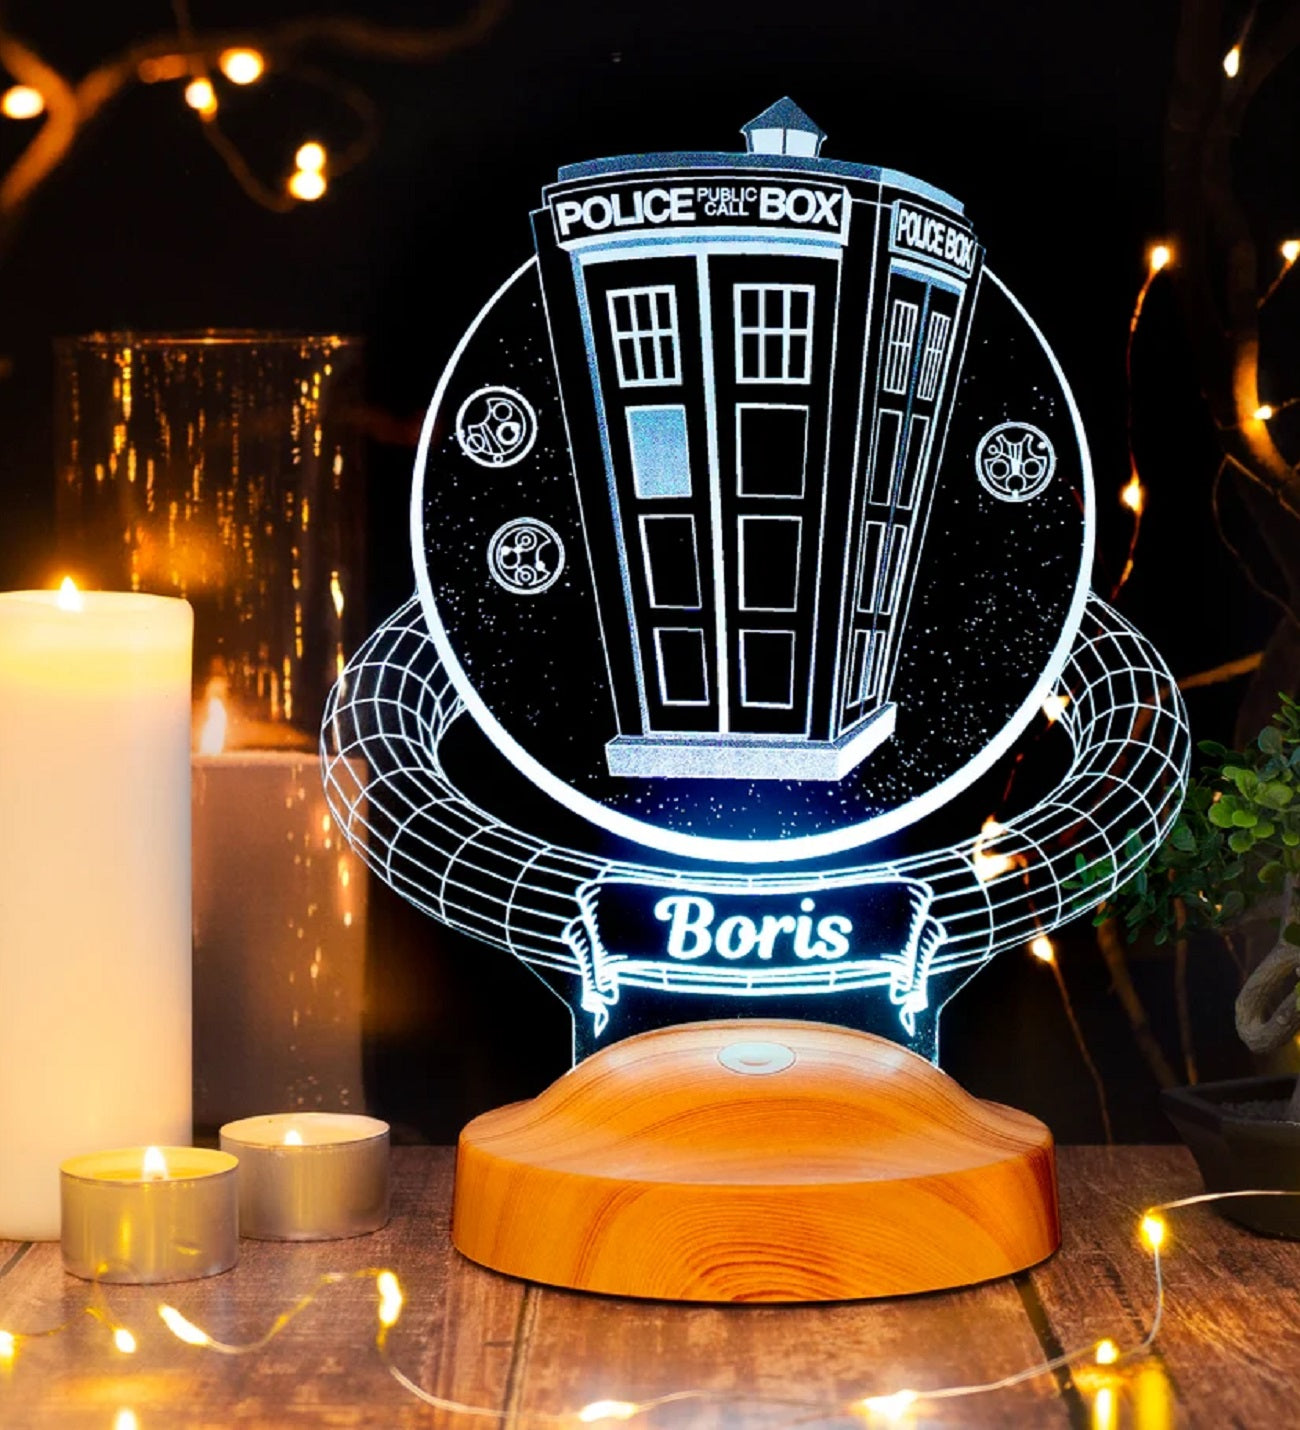 DR WHO TARDIS PERSONALISIERTE 3D LAMPE MIT WUNSCHNAME